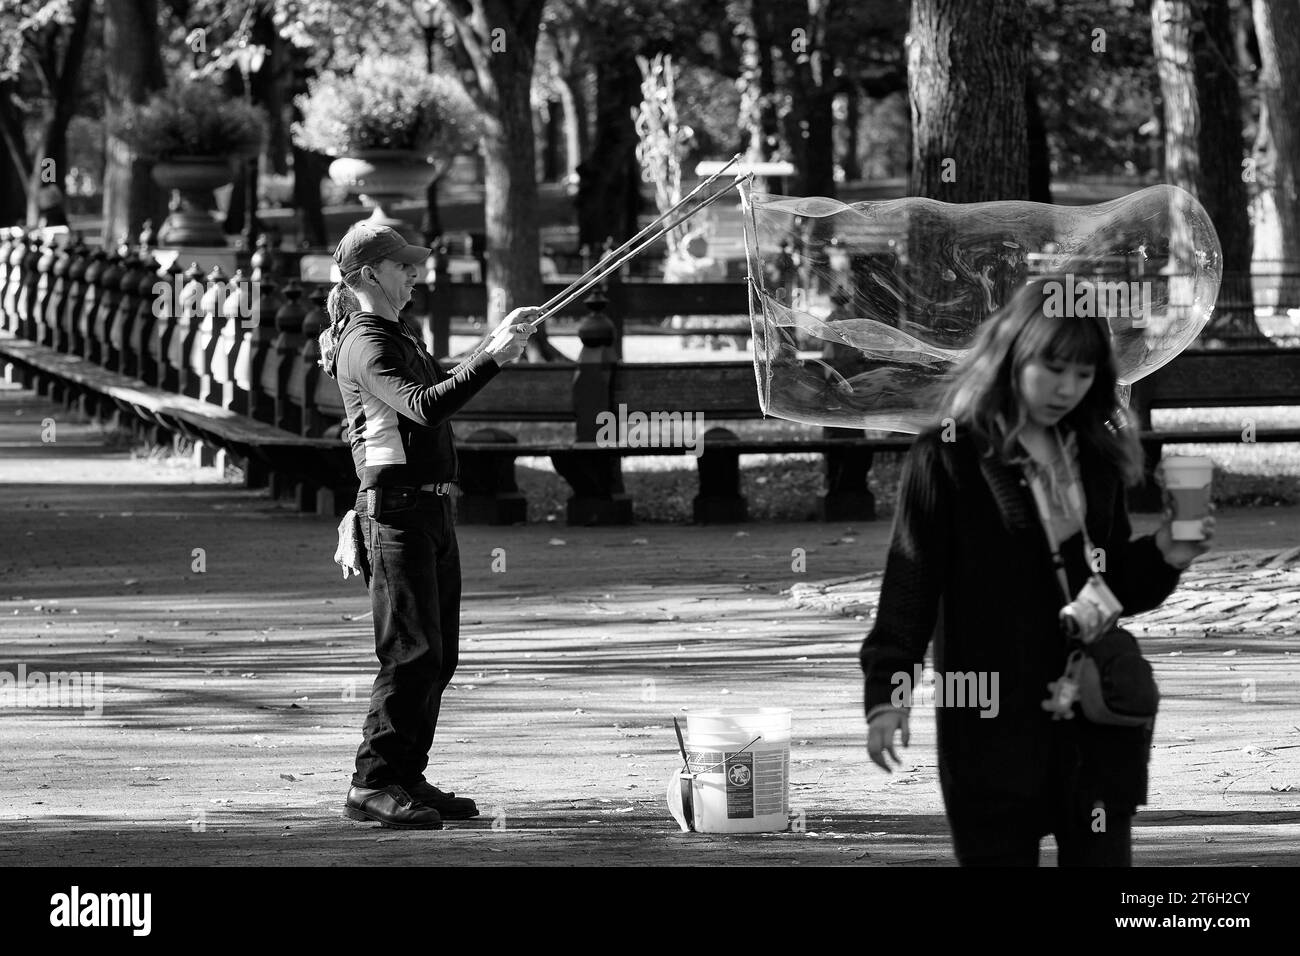 Street Performer Blowing Very Large Bubbles In Central Park, New York City, USA. Stock Photo